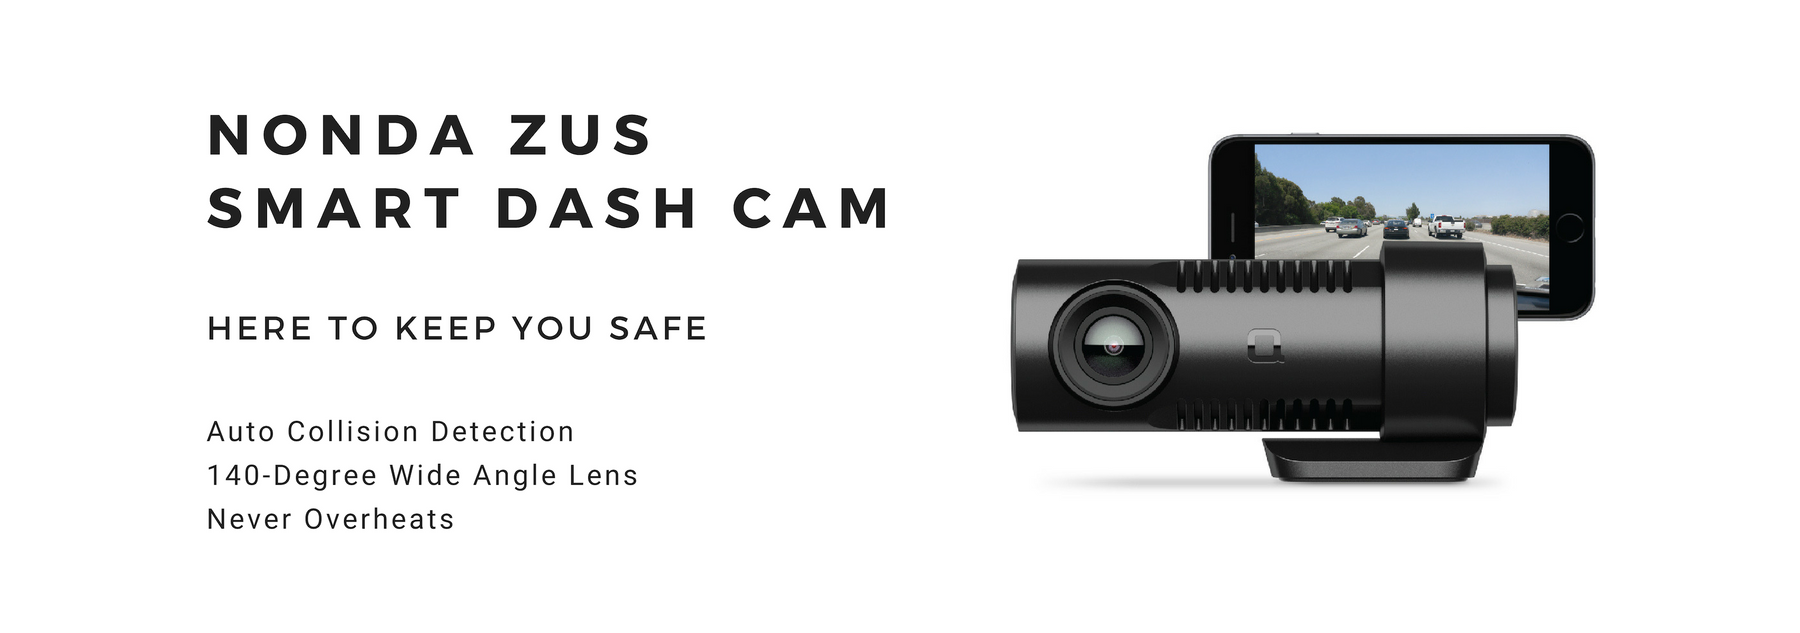 Protect you and your family with Nonda ZUS Smart Dash Cam for a better and safer new year!